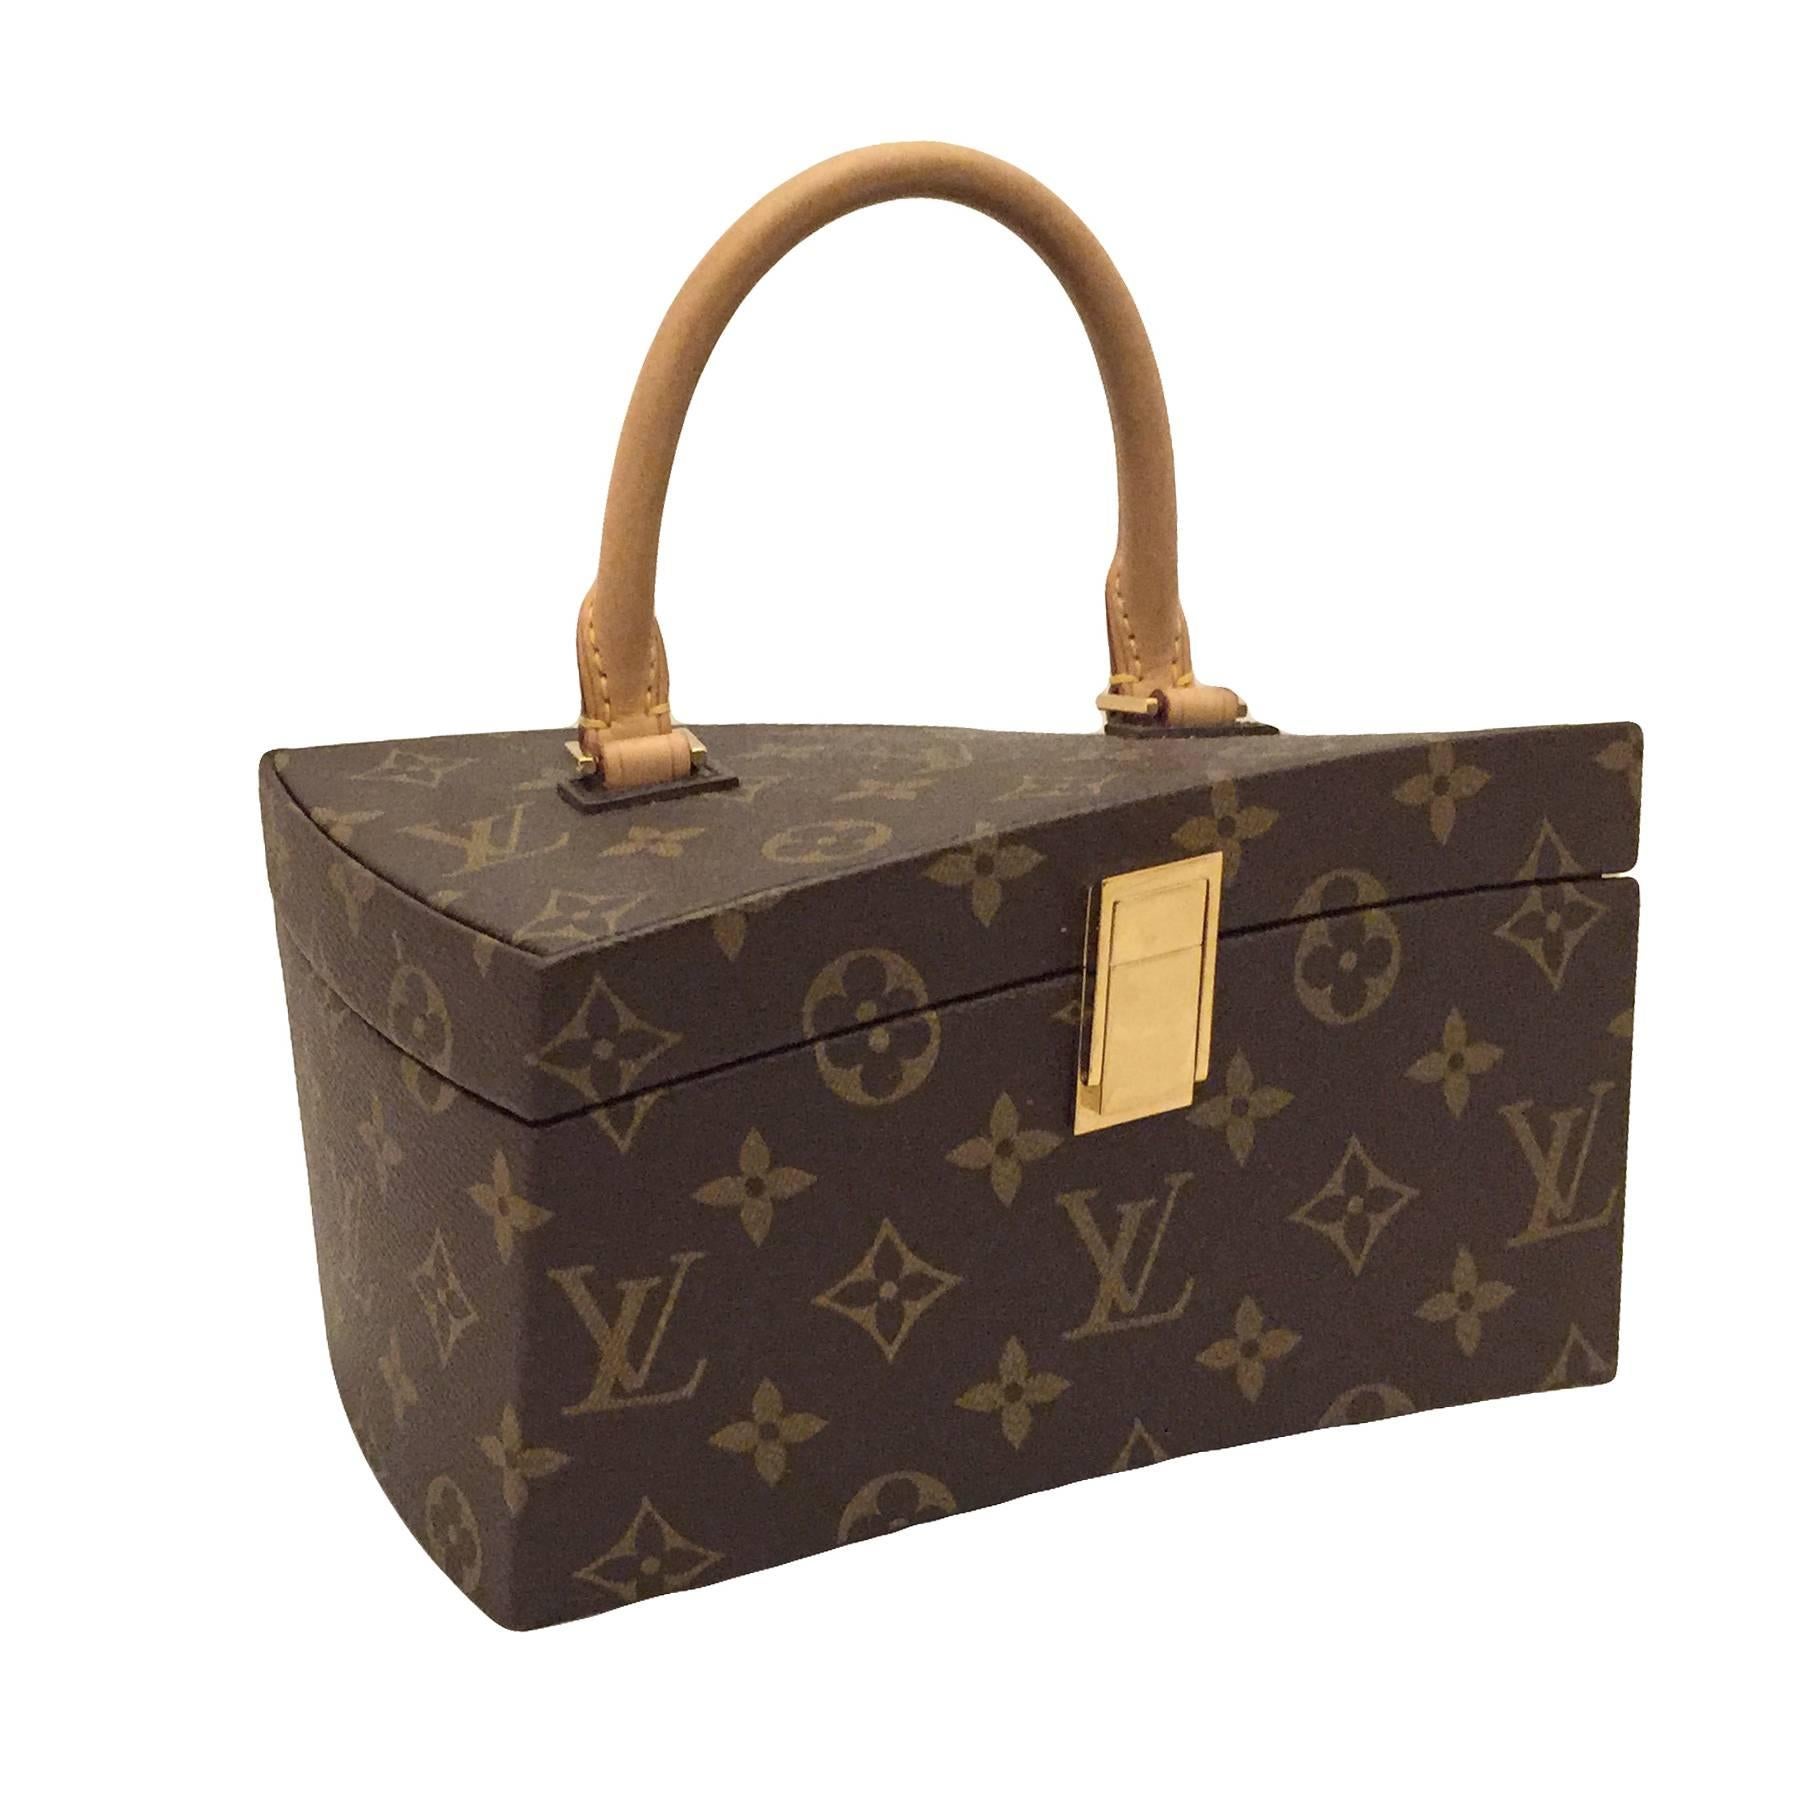 Iconic, rare Louis Vuitton Twisted Box Clutch by Frank Gehry